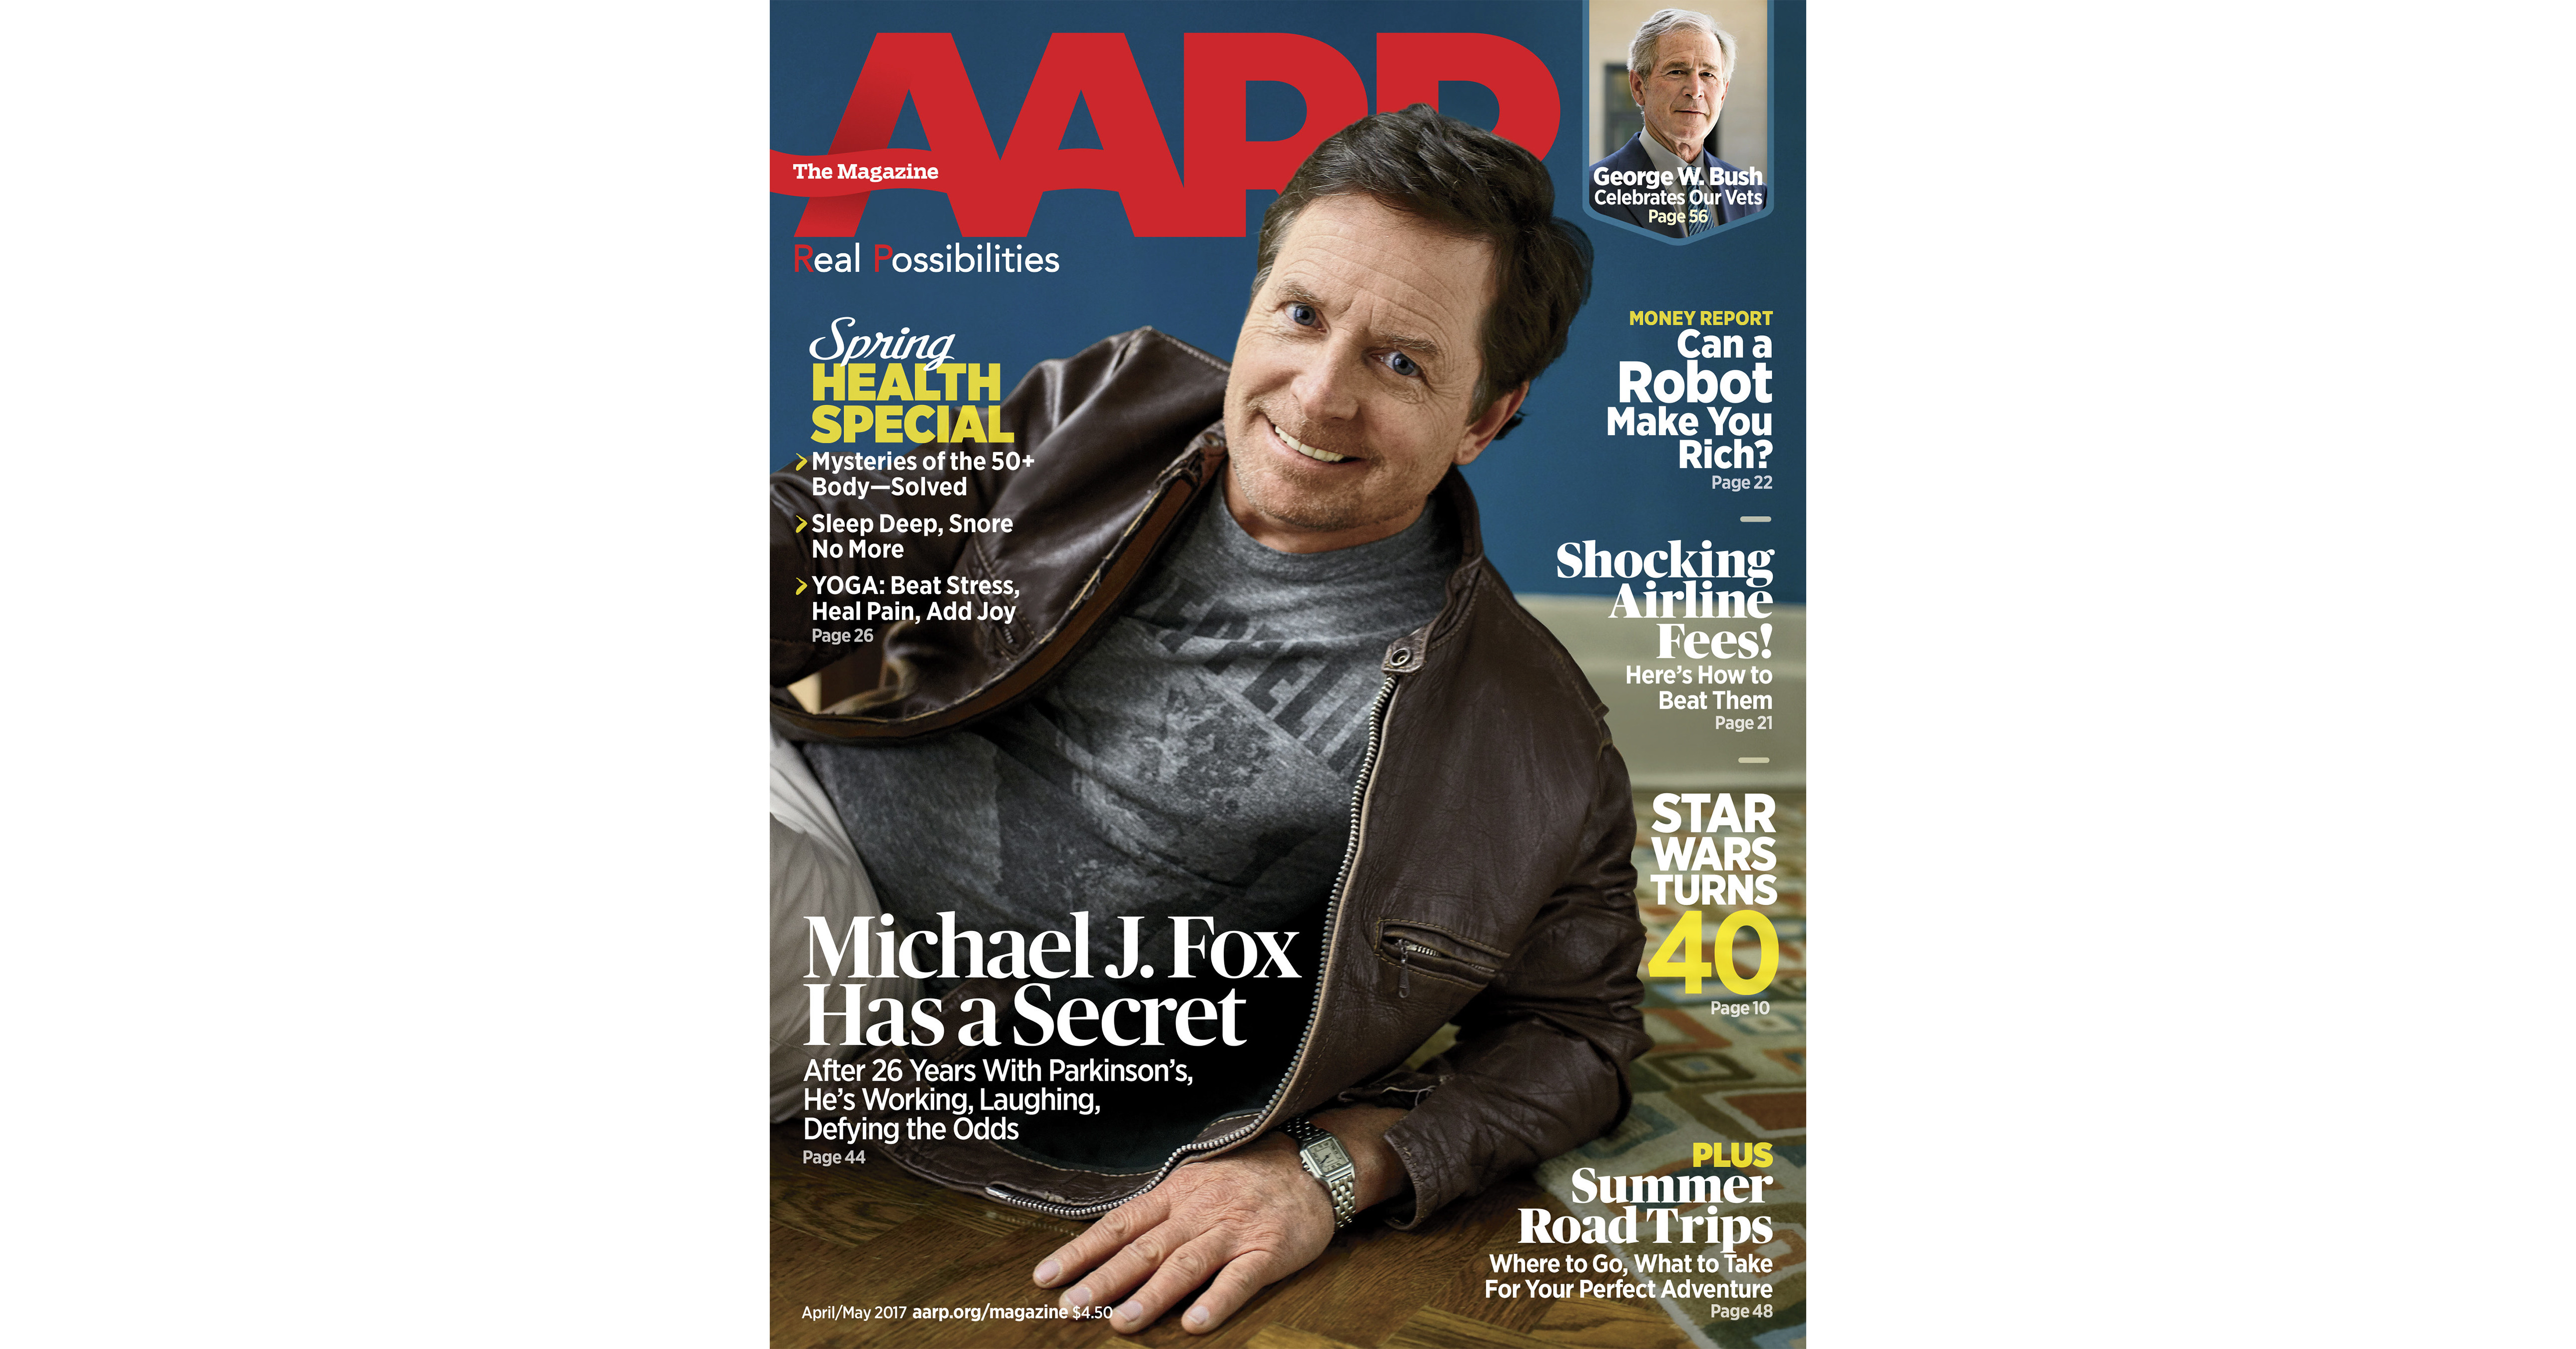 Inside the April/May Issue of AARP The Magazine